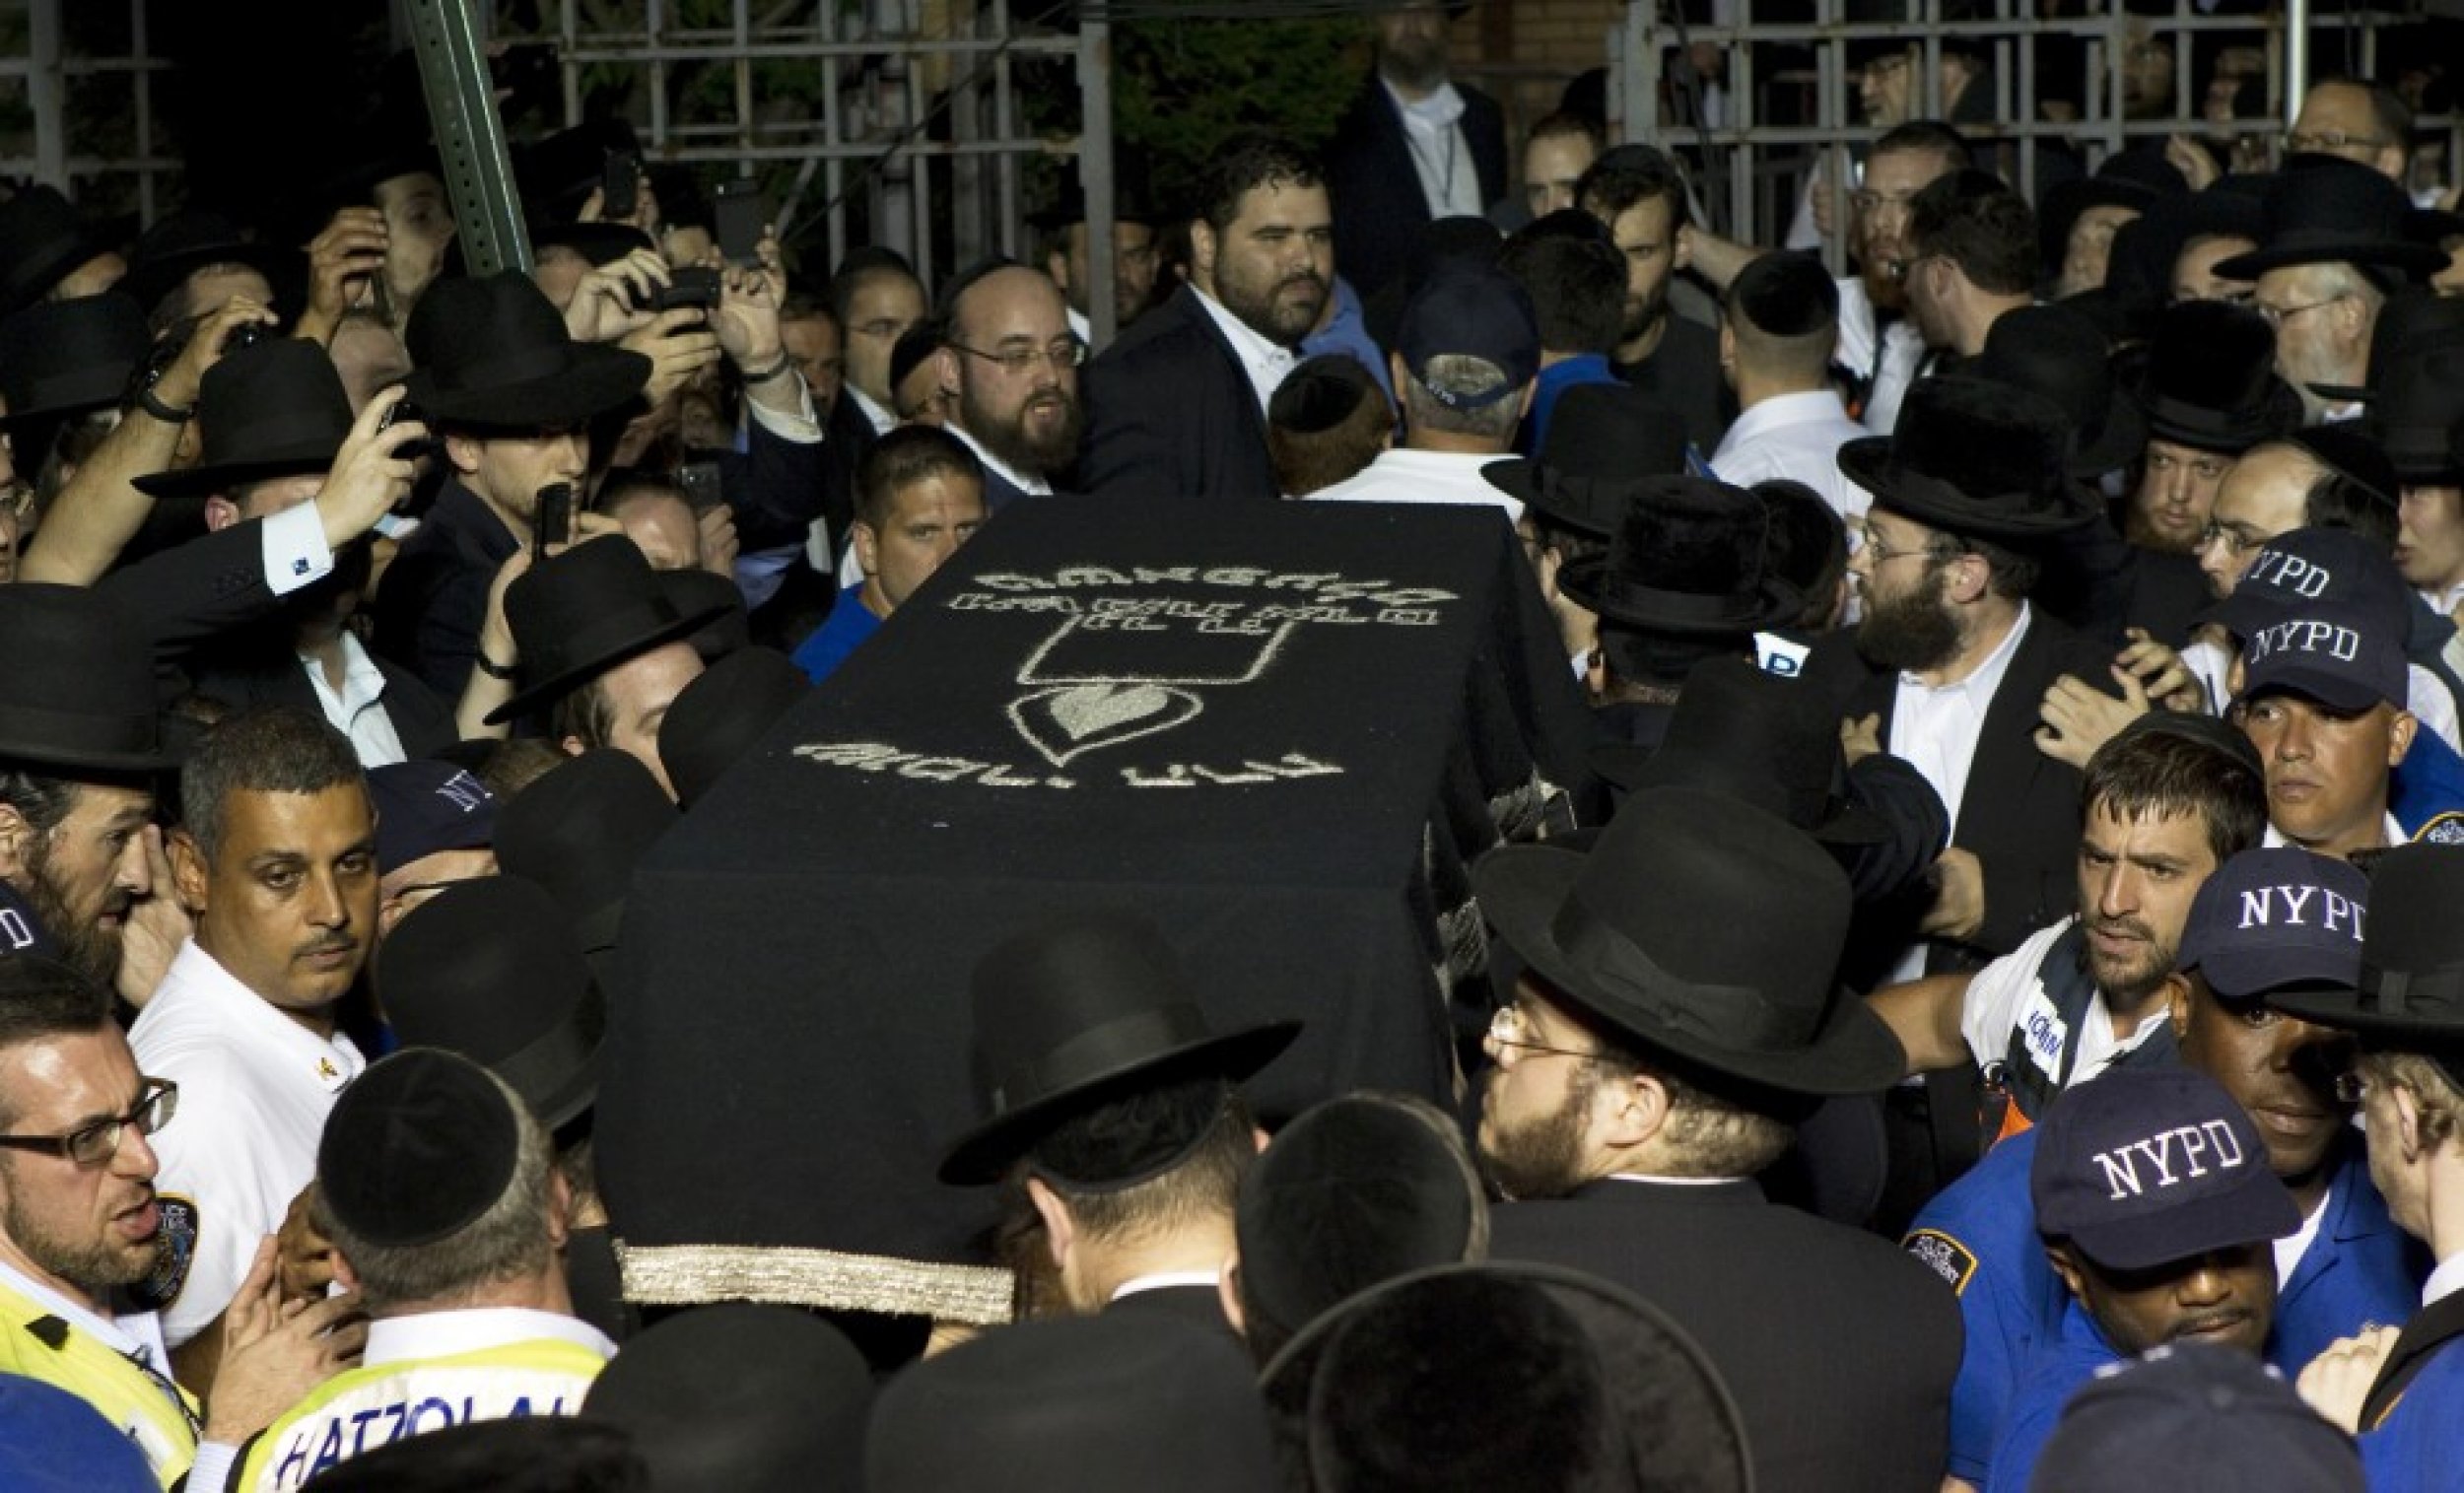 The casket of Leiby Kletzky is carried into a synagogue for his funeral service in New York